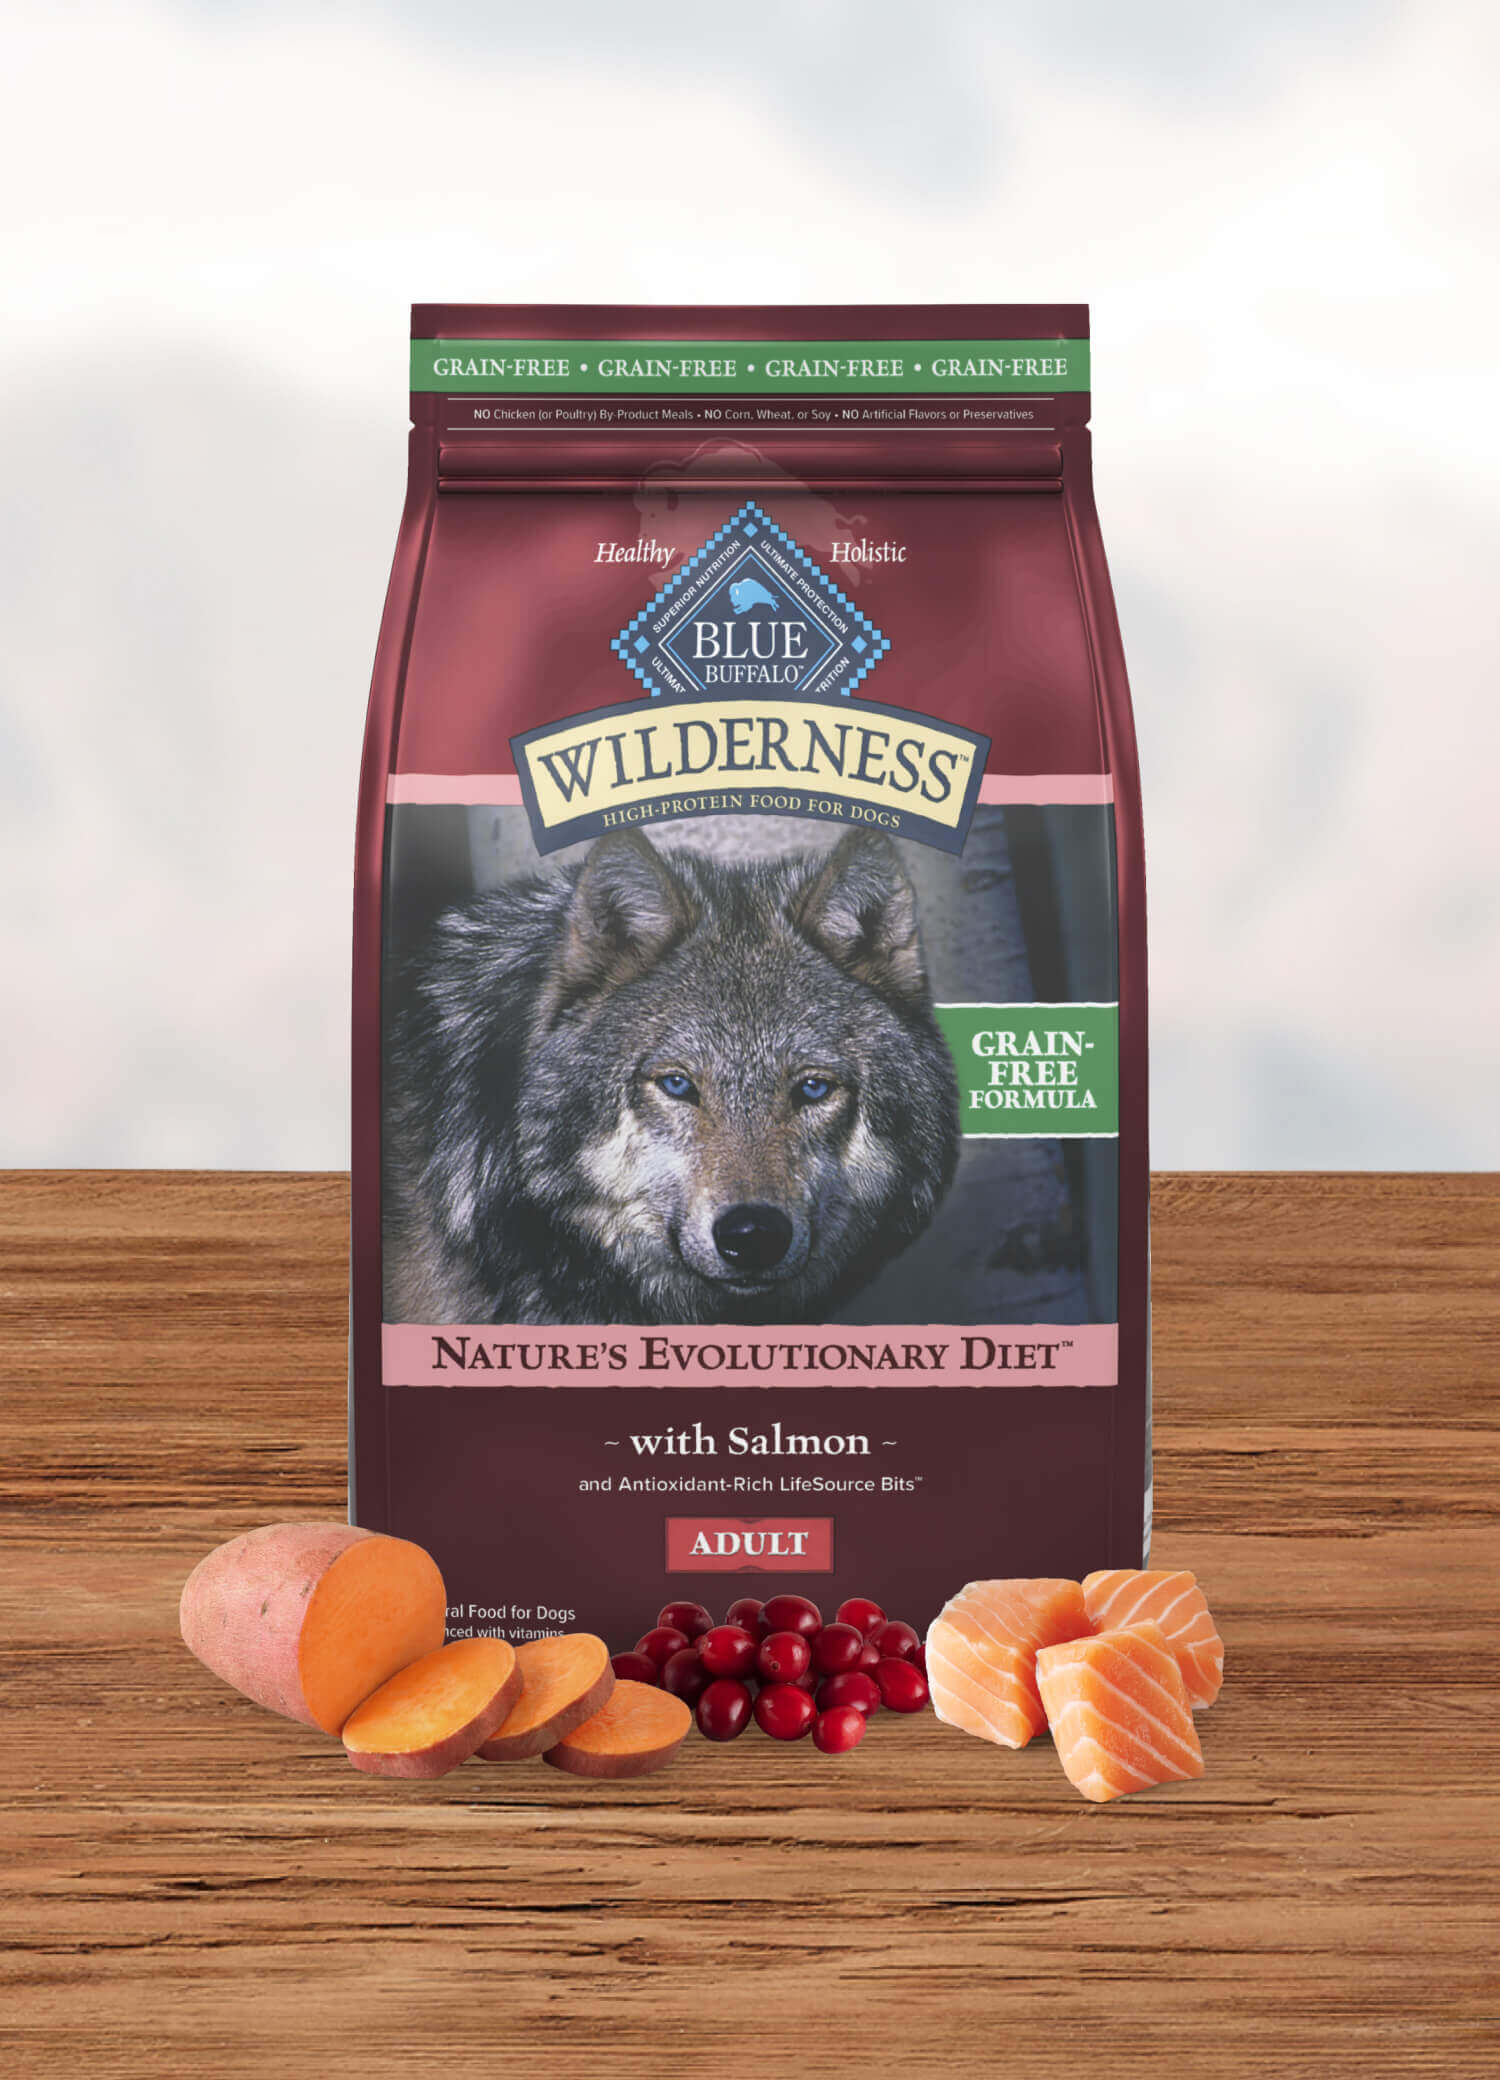 A bag of Wilderness Nature’s Evolutionary Diet with Salmon and LifeSource Bits  Adult Dog – Grain-Free dog dry food